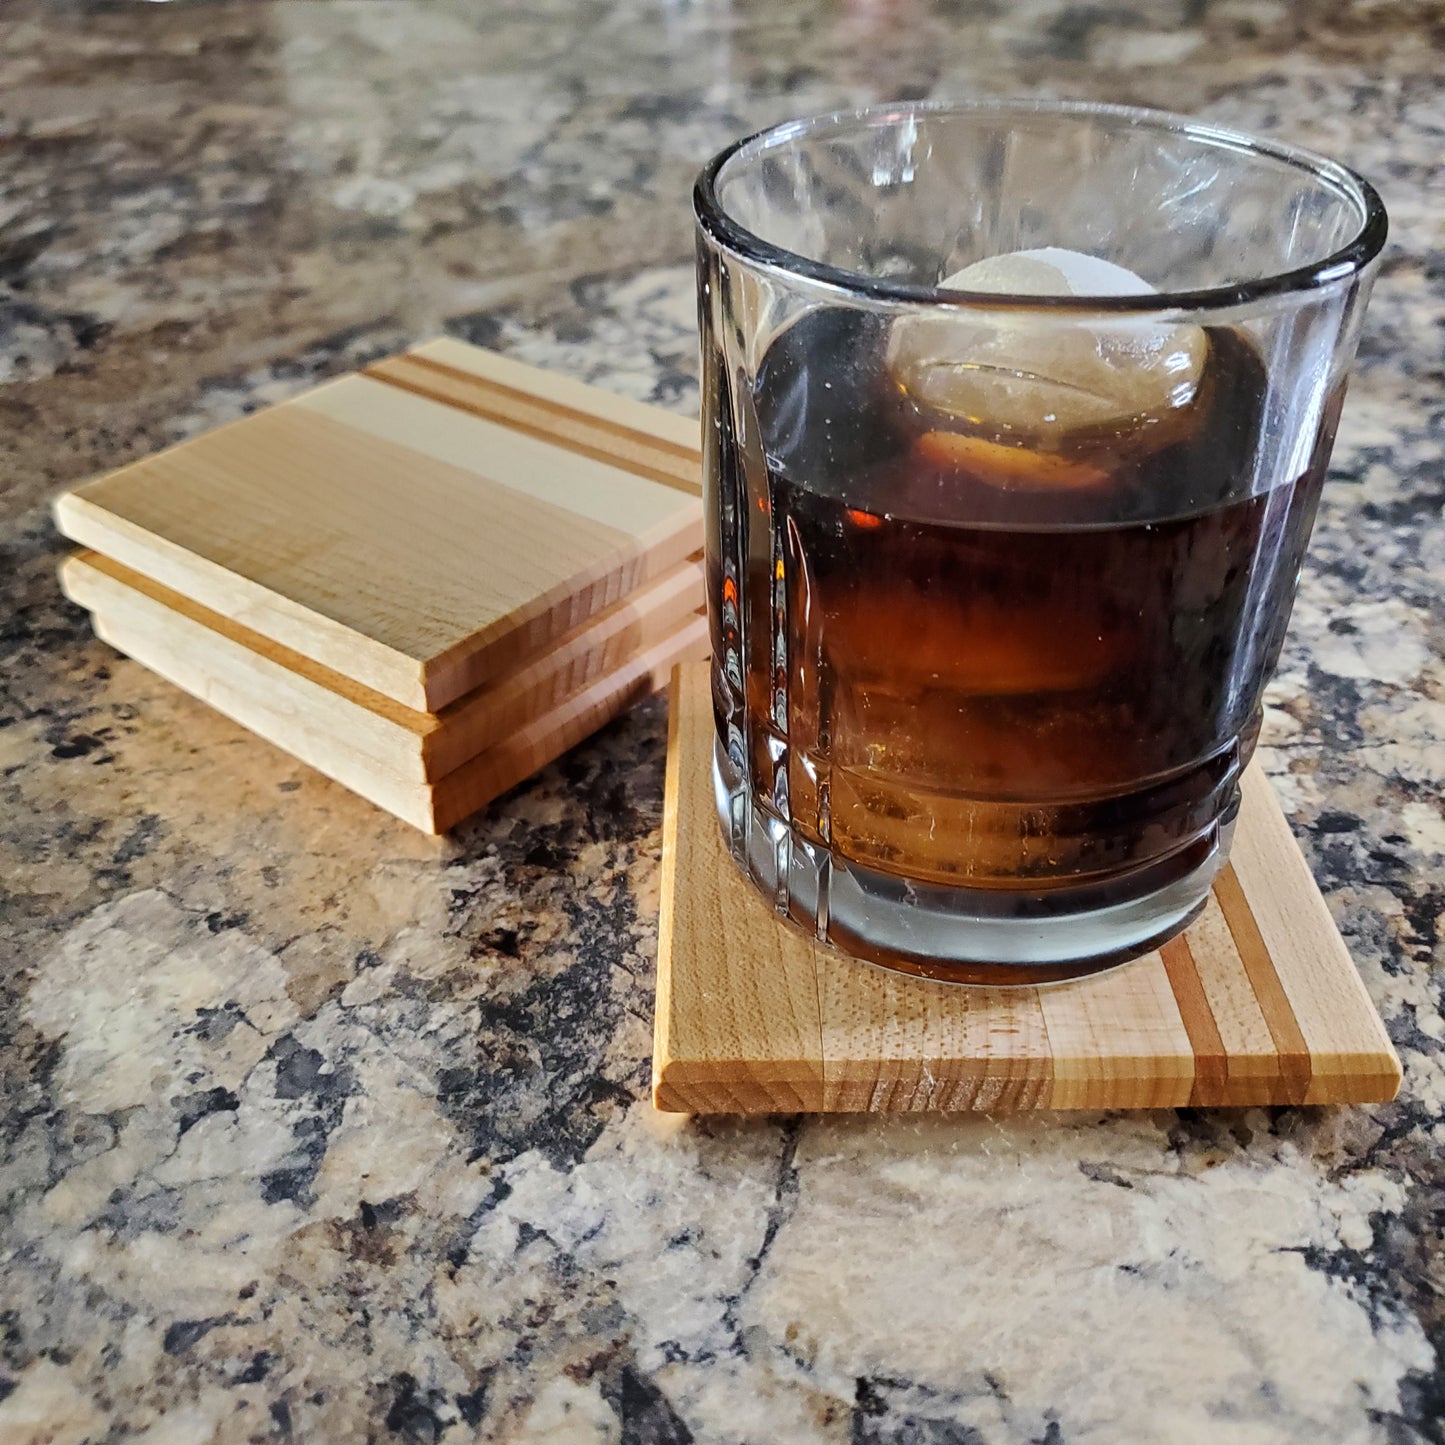 Classic coasters, made of primarily maple with two cherry stripes